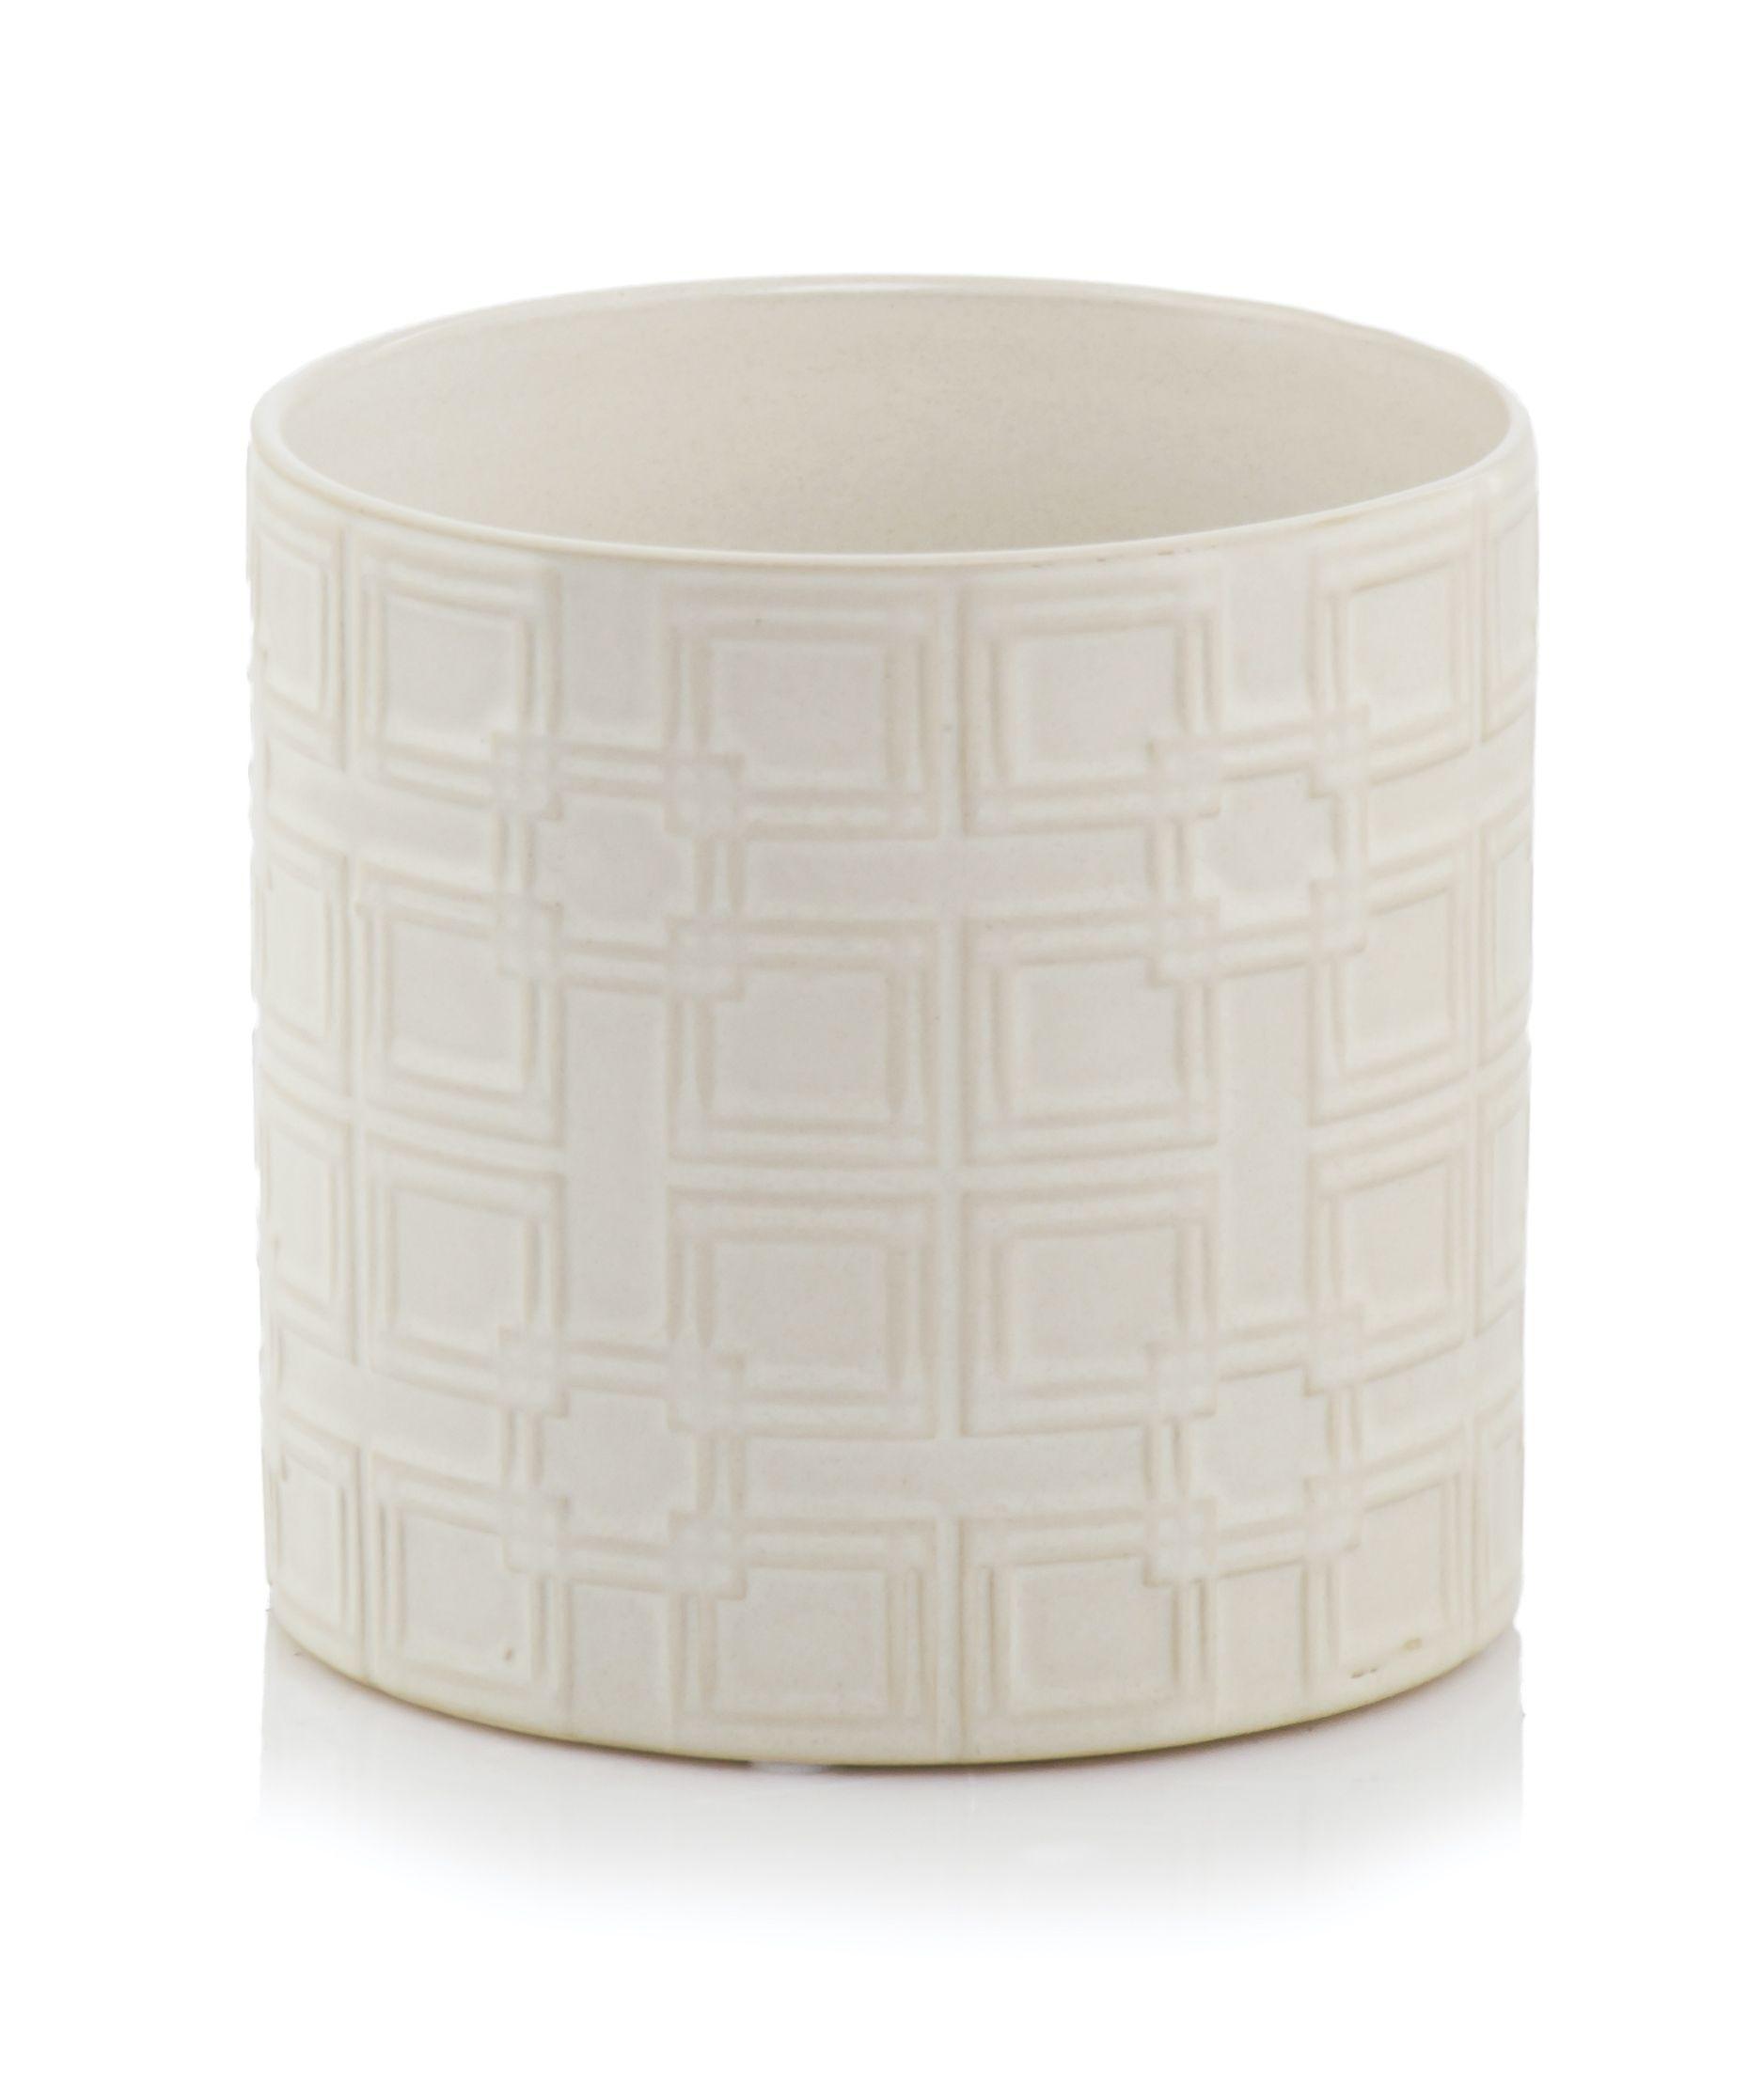 Cylindrical flower pot, cream-colored, 16 cm, Vintage collection